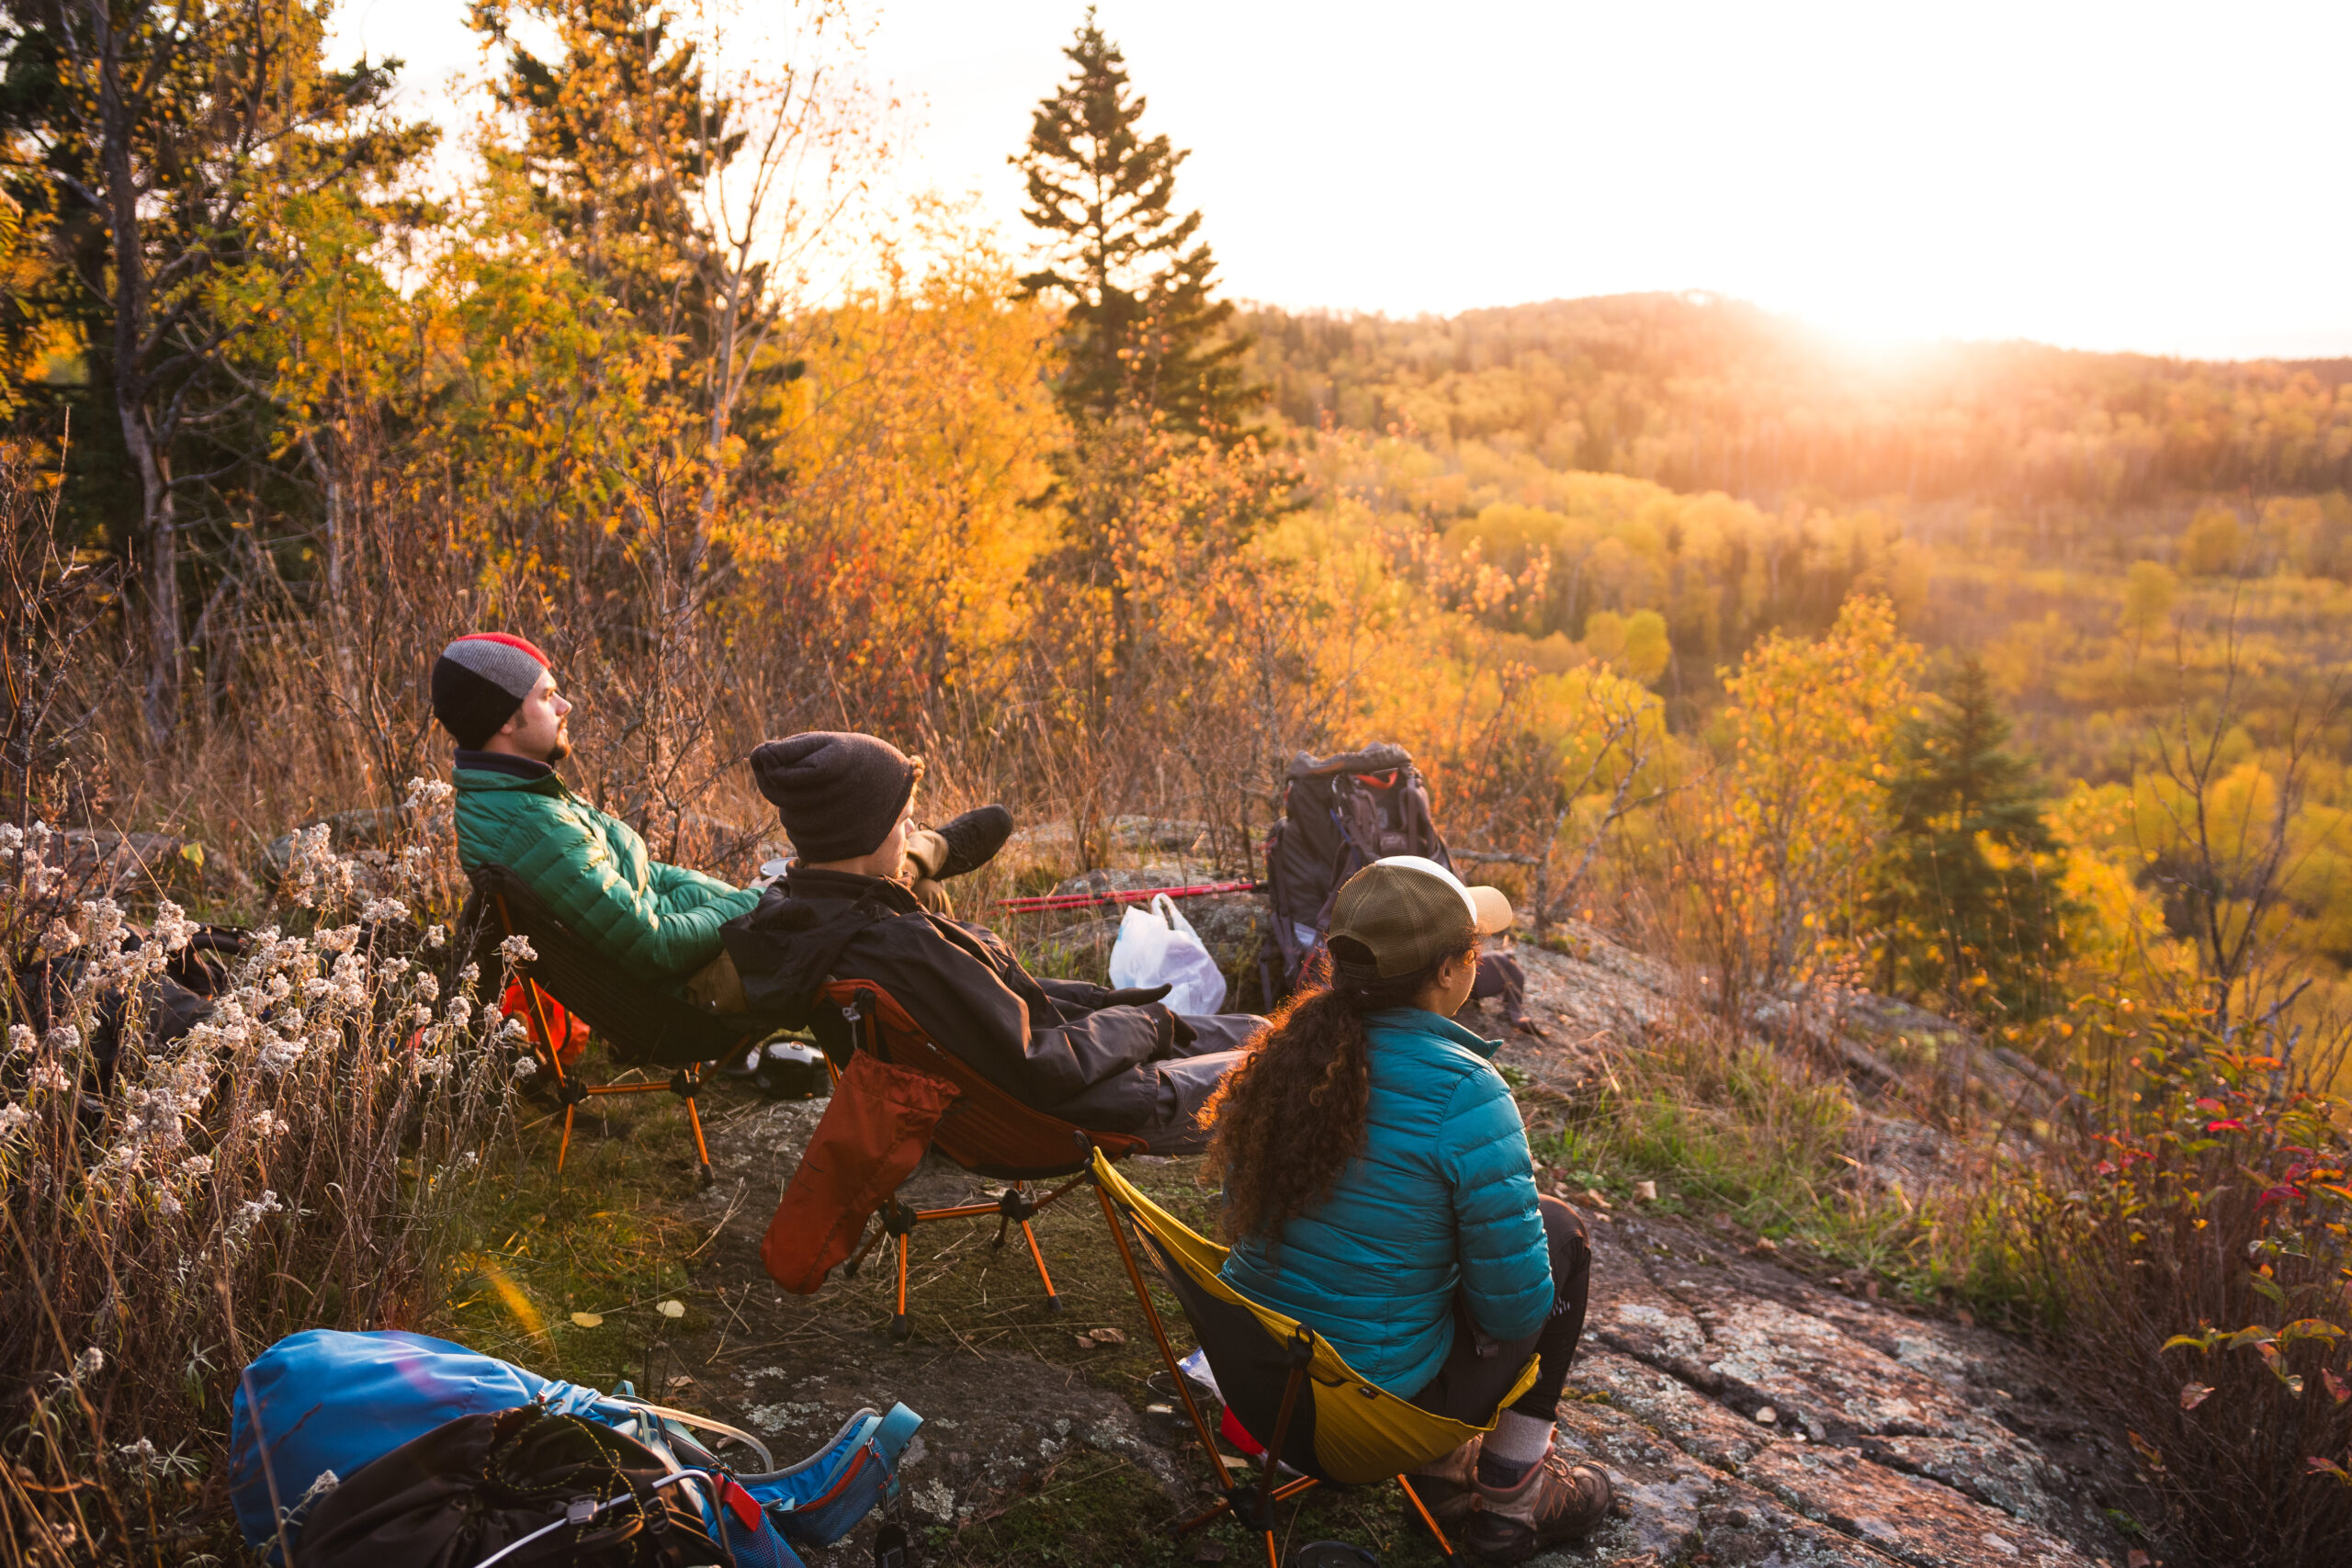 Three people sit on camping chairs atop a rocky cliff, overlooking a forest valley in autumn. They face a golden sunset, surrounded by trees with vibrant fall colors. Backpacks and gear are scattered around as they enjoy the serene natural view, like savoring coffee in Duluth on a crisp morning.